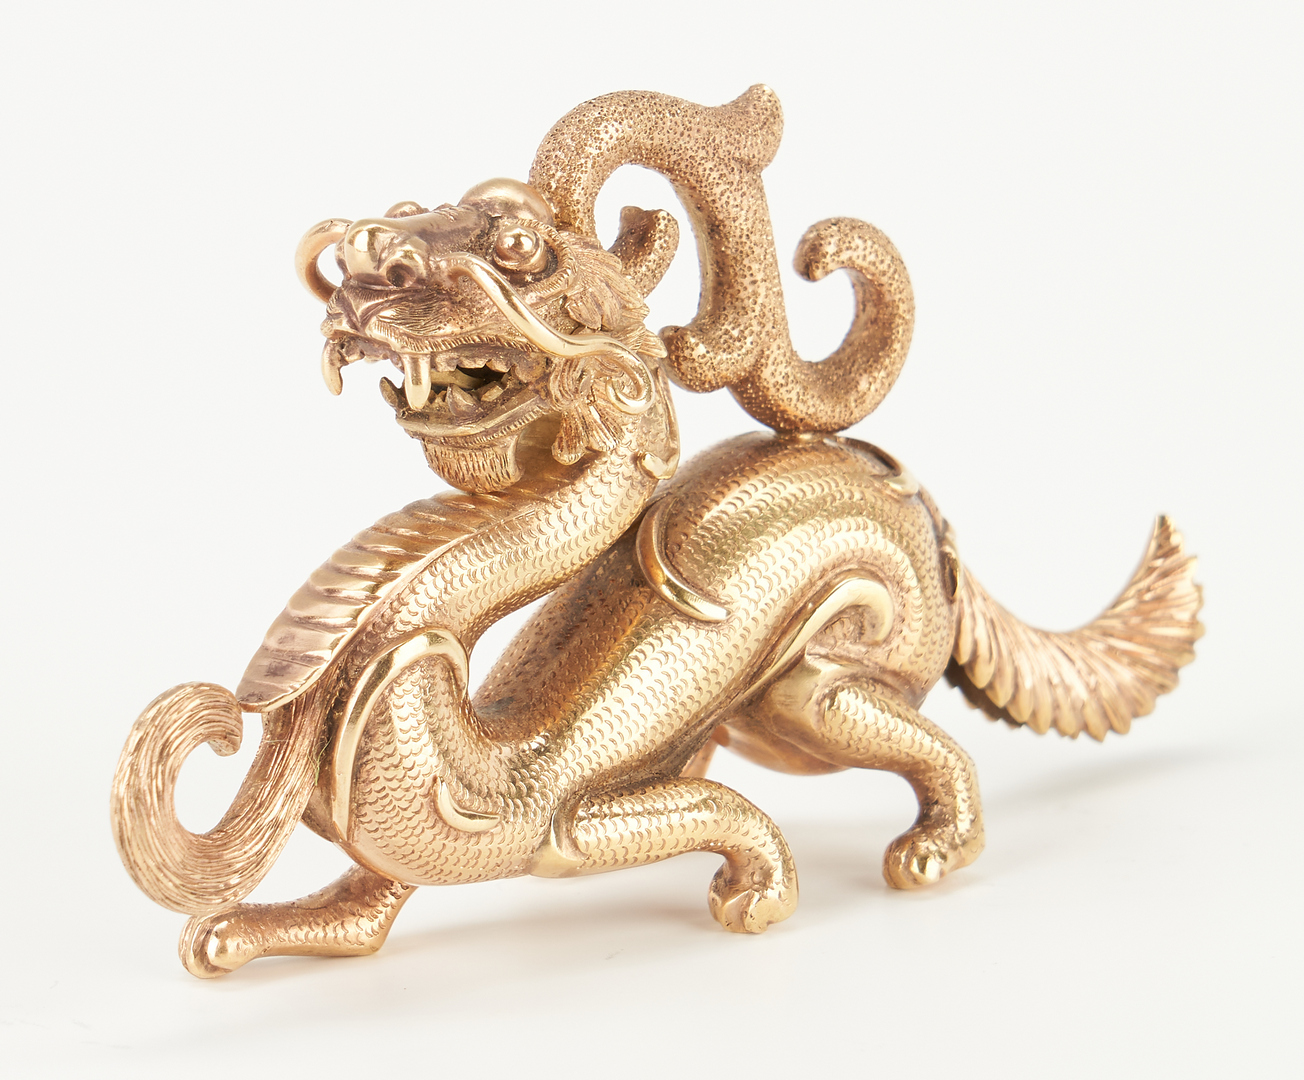 Lot 1: Chinese 14K Gold Figural Dragon on Stand